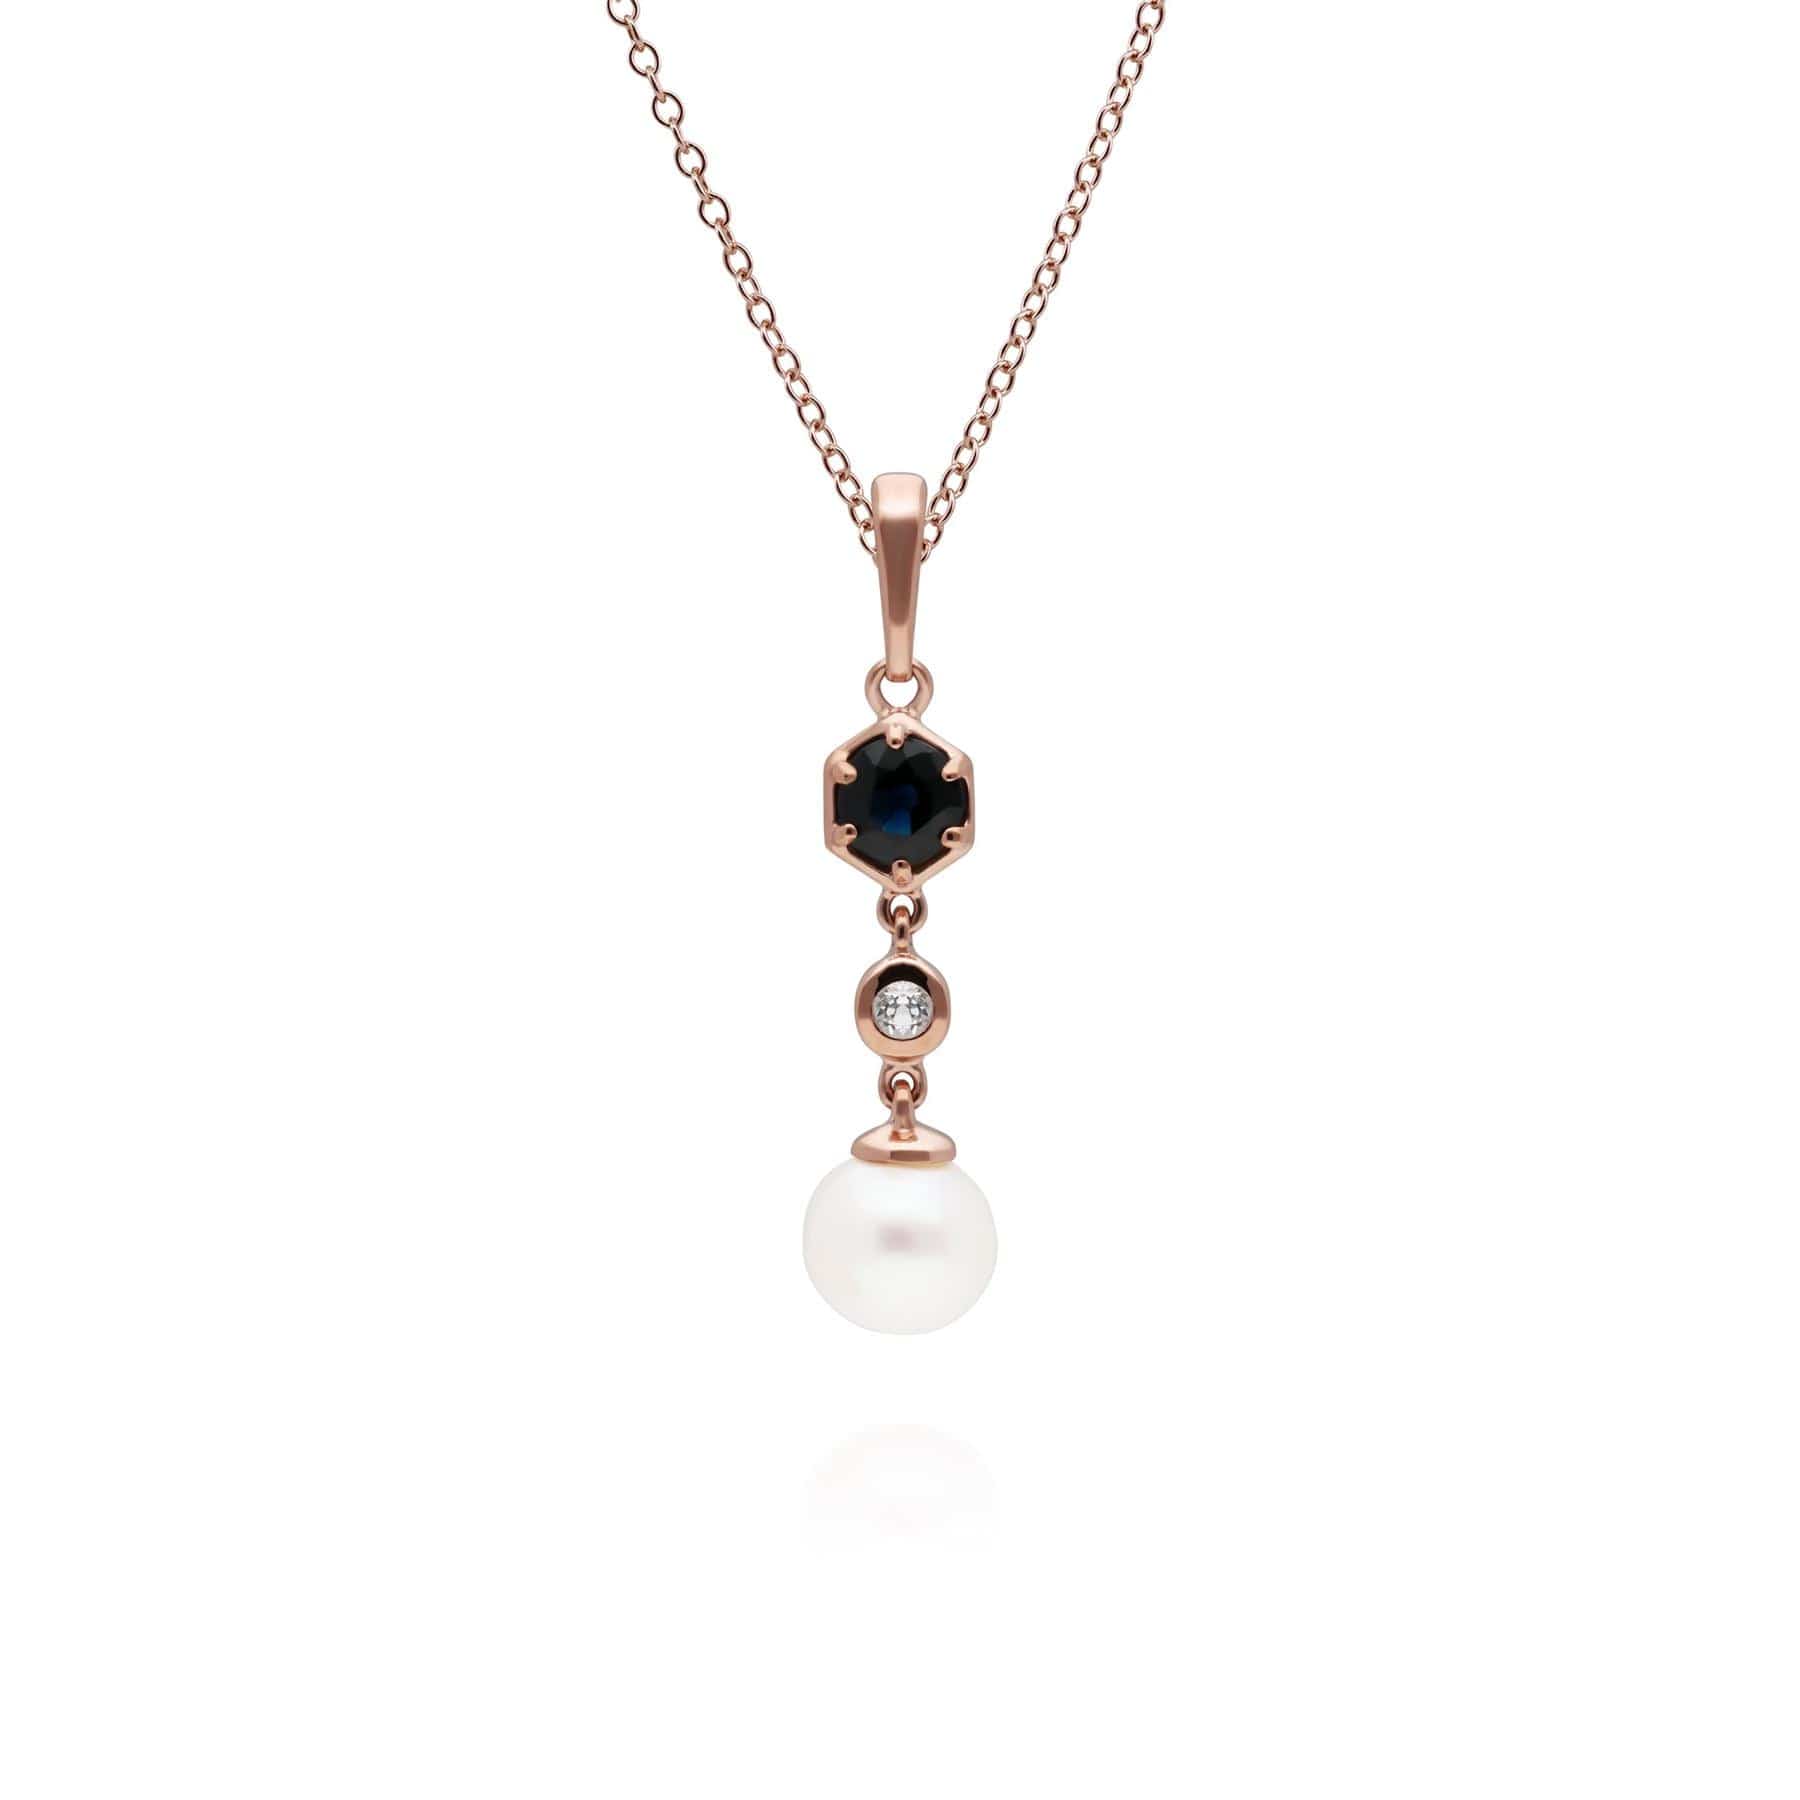 Photos - Pendant / Choker Necklace Modern Pearl, Sapphire & Topaz Drop Pendant in Rose Gold Plated Silver